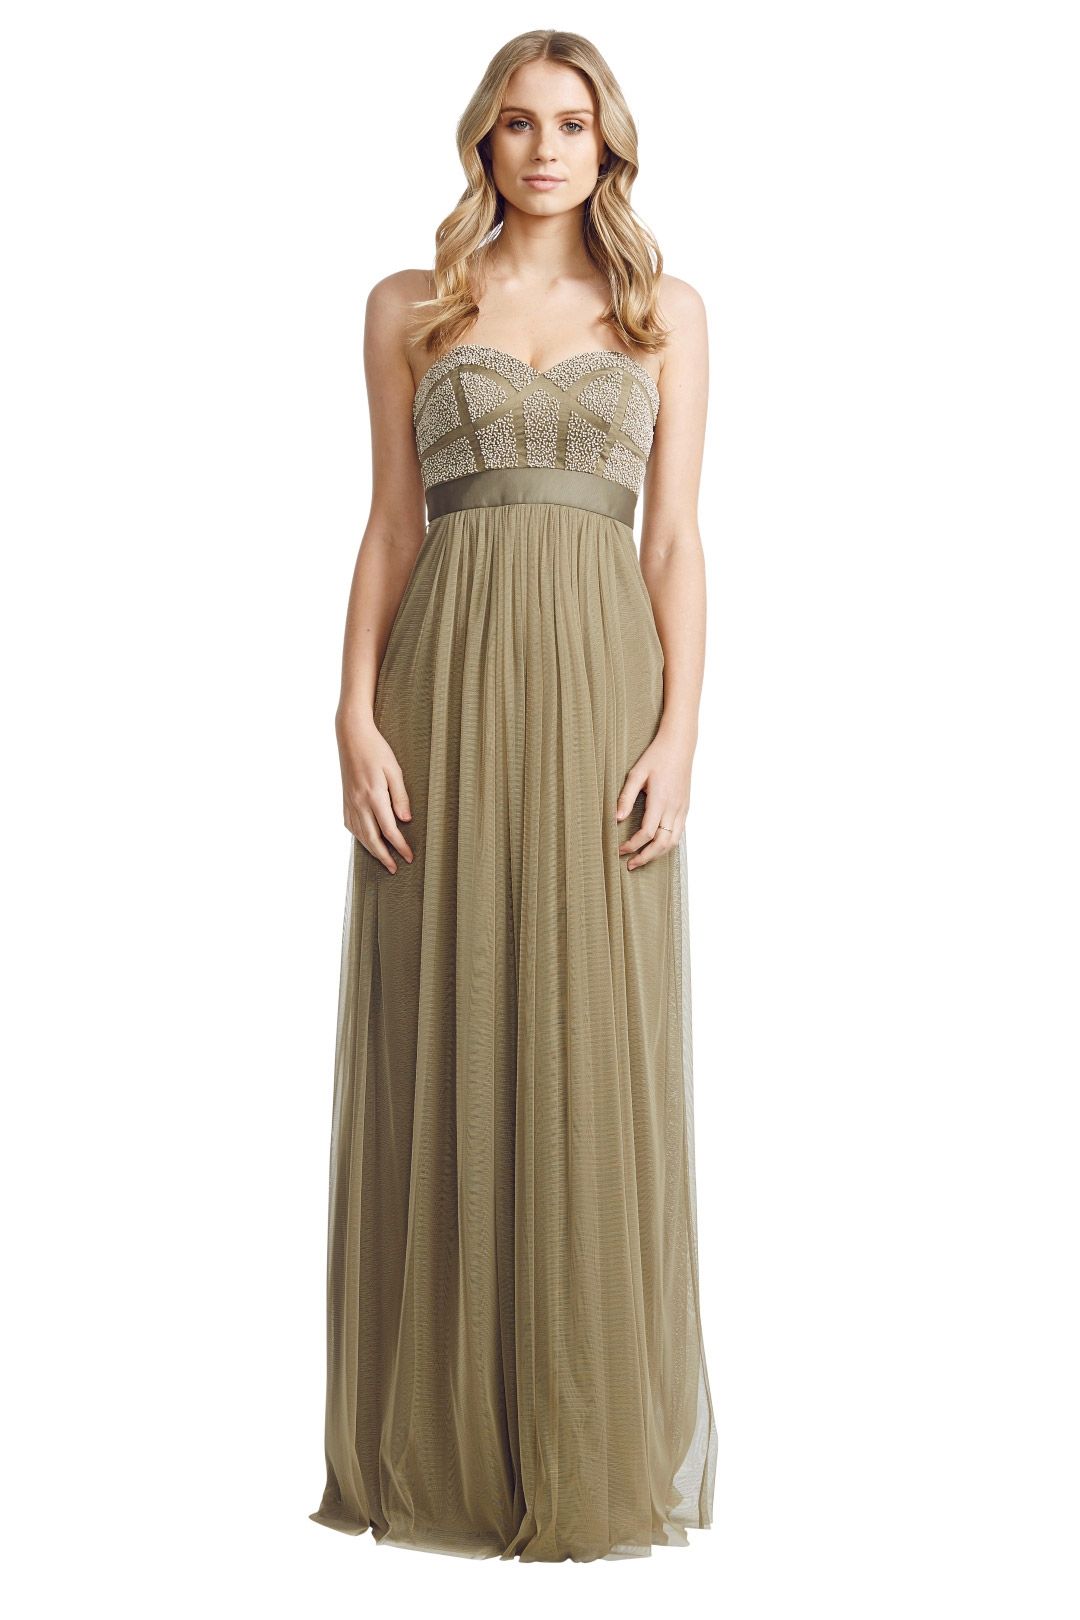 George - Pixel Gown - Olive - Front